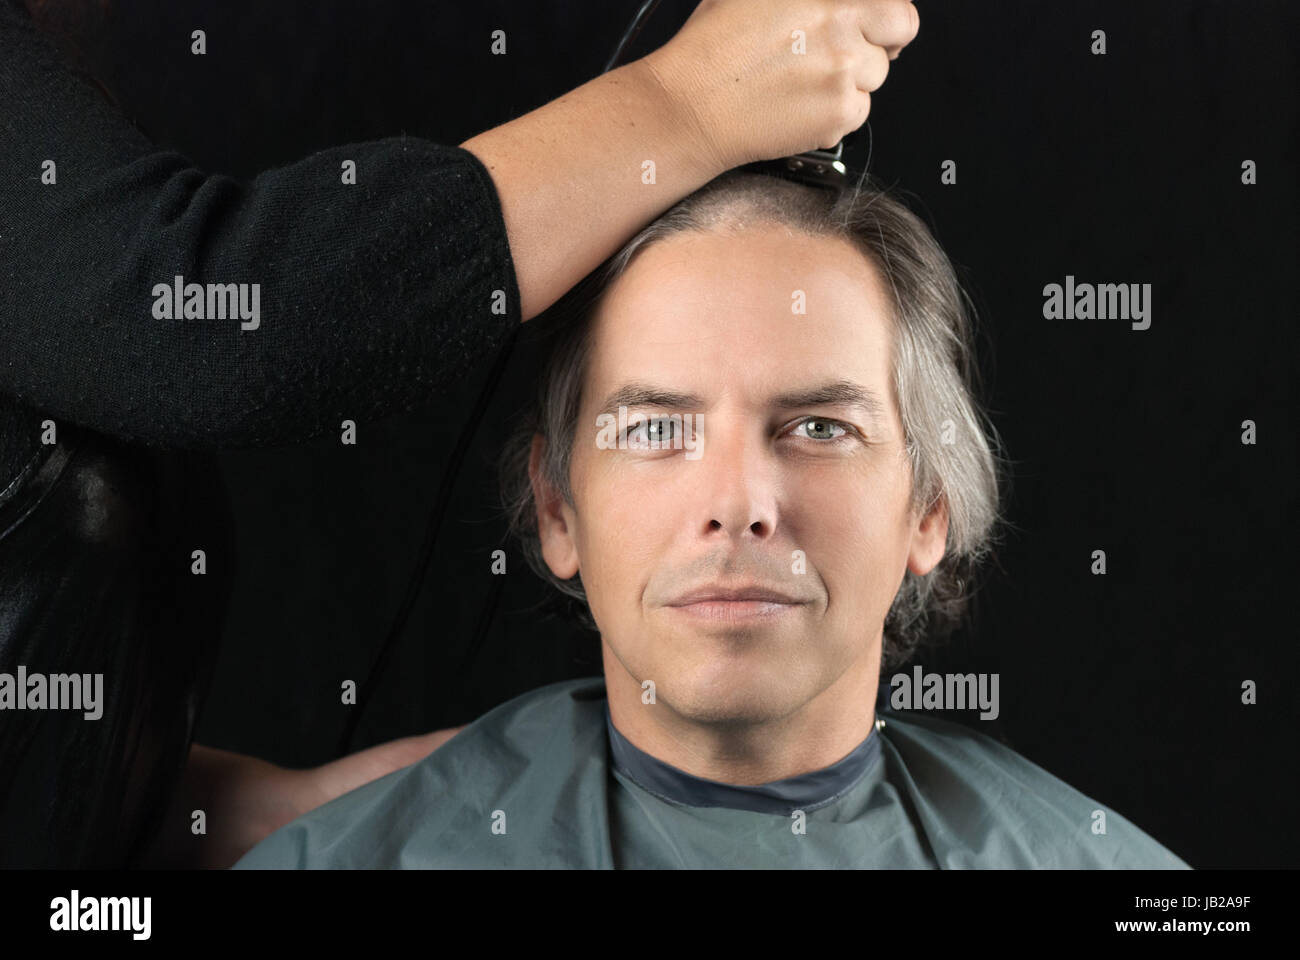 Close-up of a serious man looking to camera while his long hair is shaved off for a cancer fundraiser. Stock Photo